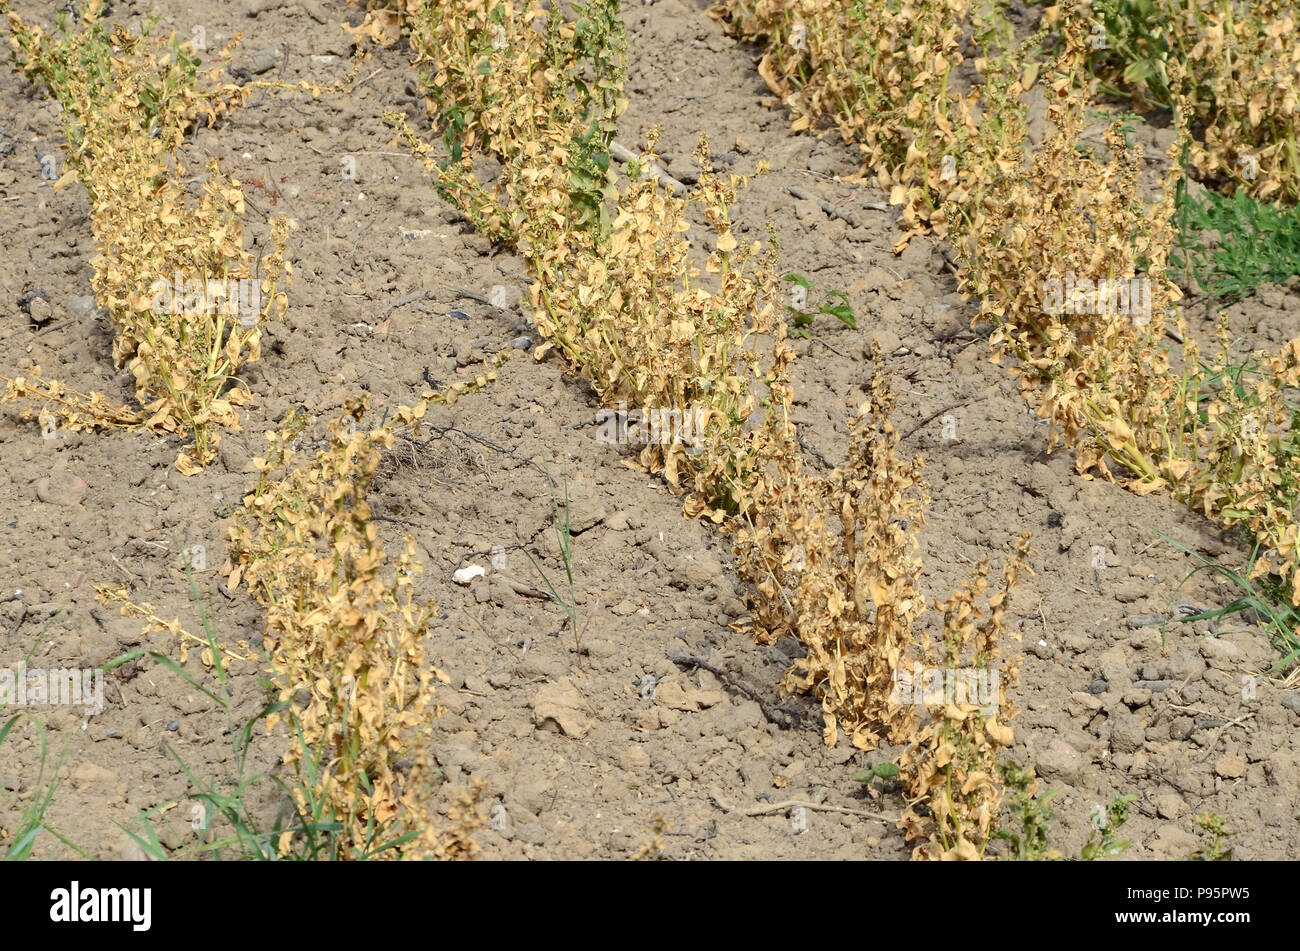 Withered Lucerne plants on a field caused by a severe drought. Stock Photo